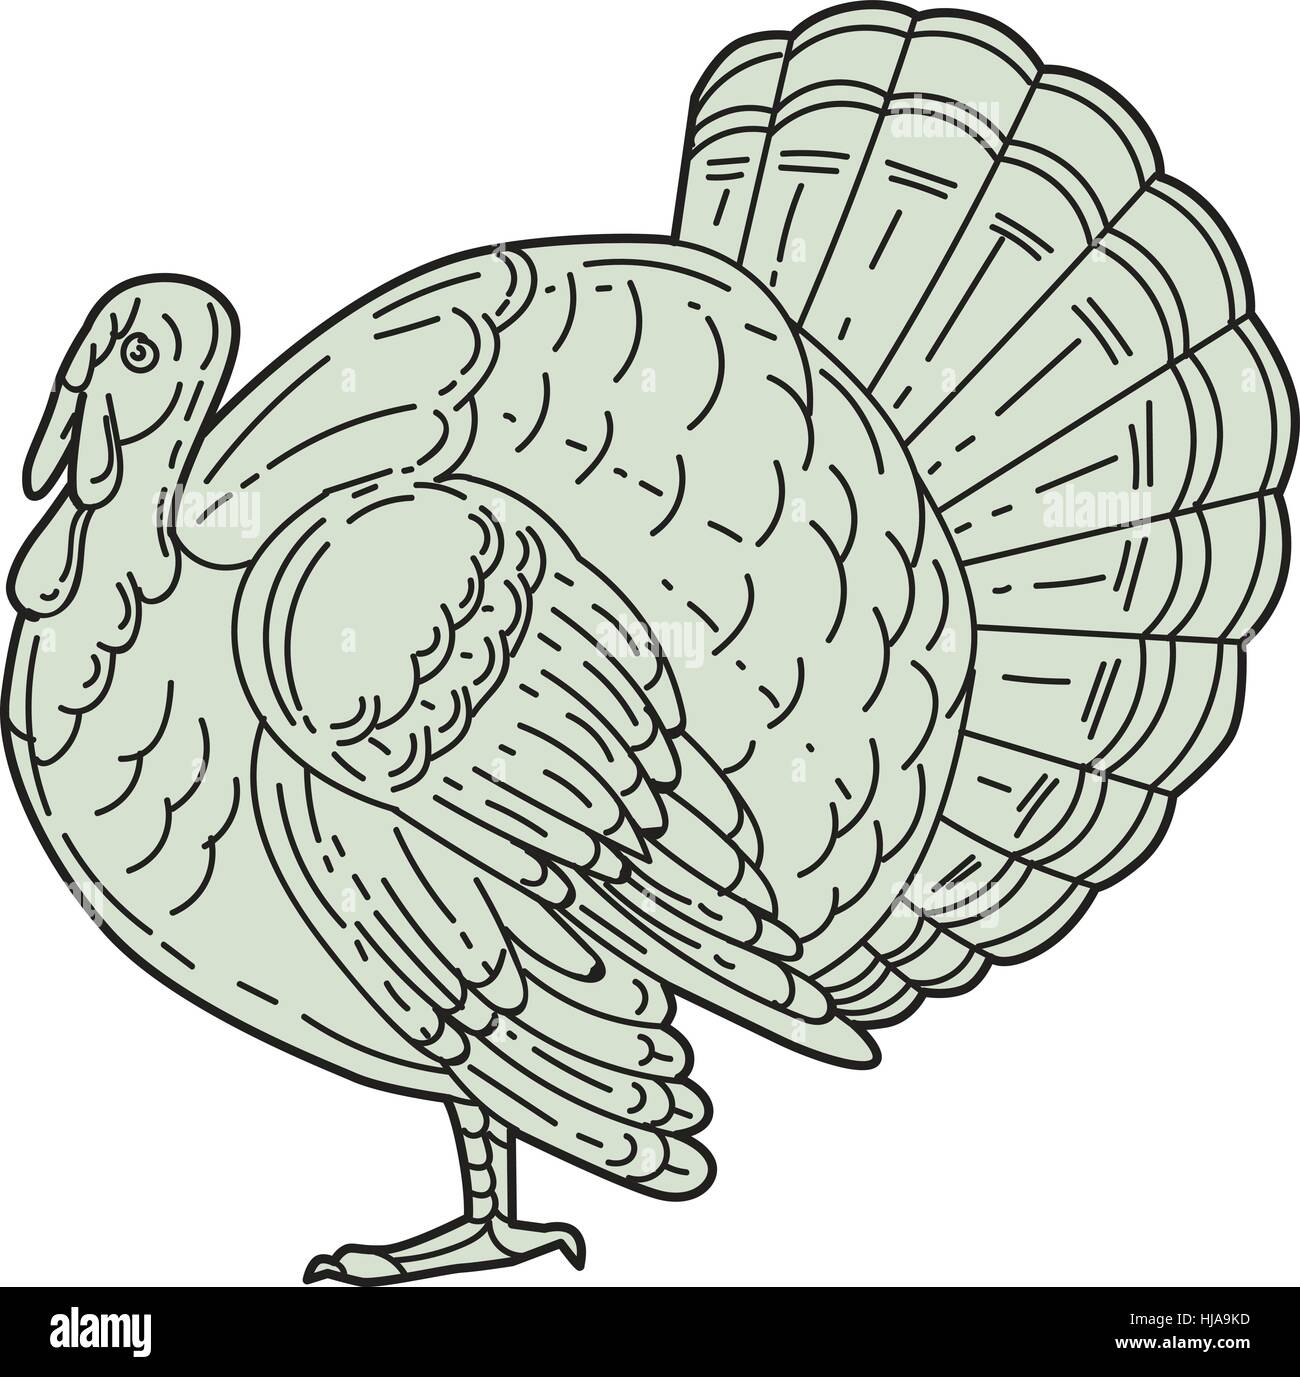 Mono line style illustration of a wild turkey viewed from the side set on isolated white background. Stock Vector